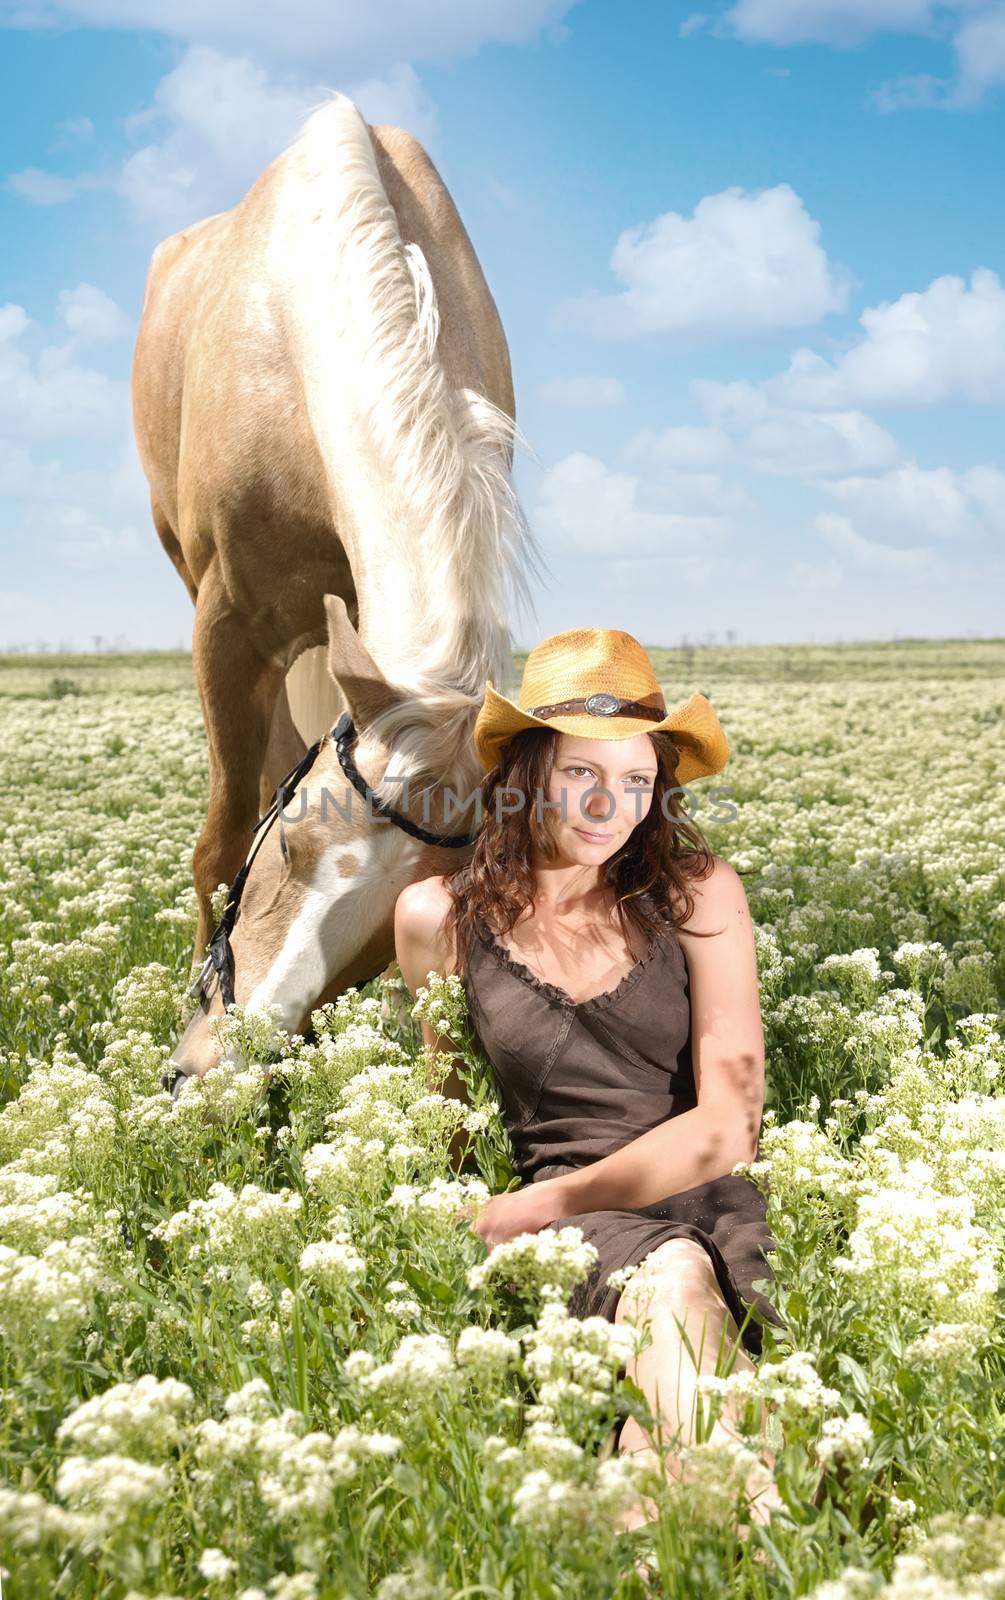 Tender relationship between the horse and lady sitting in the grass